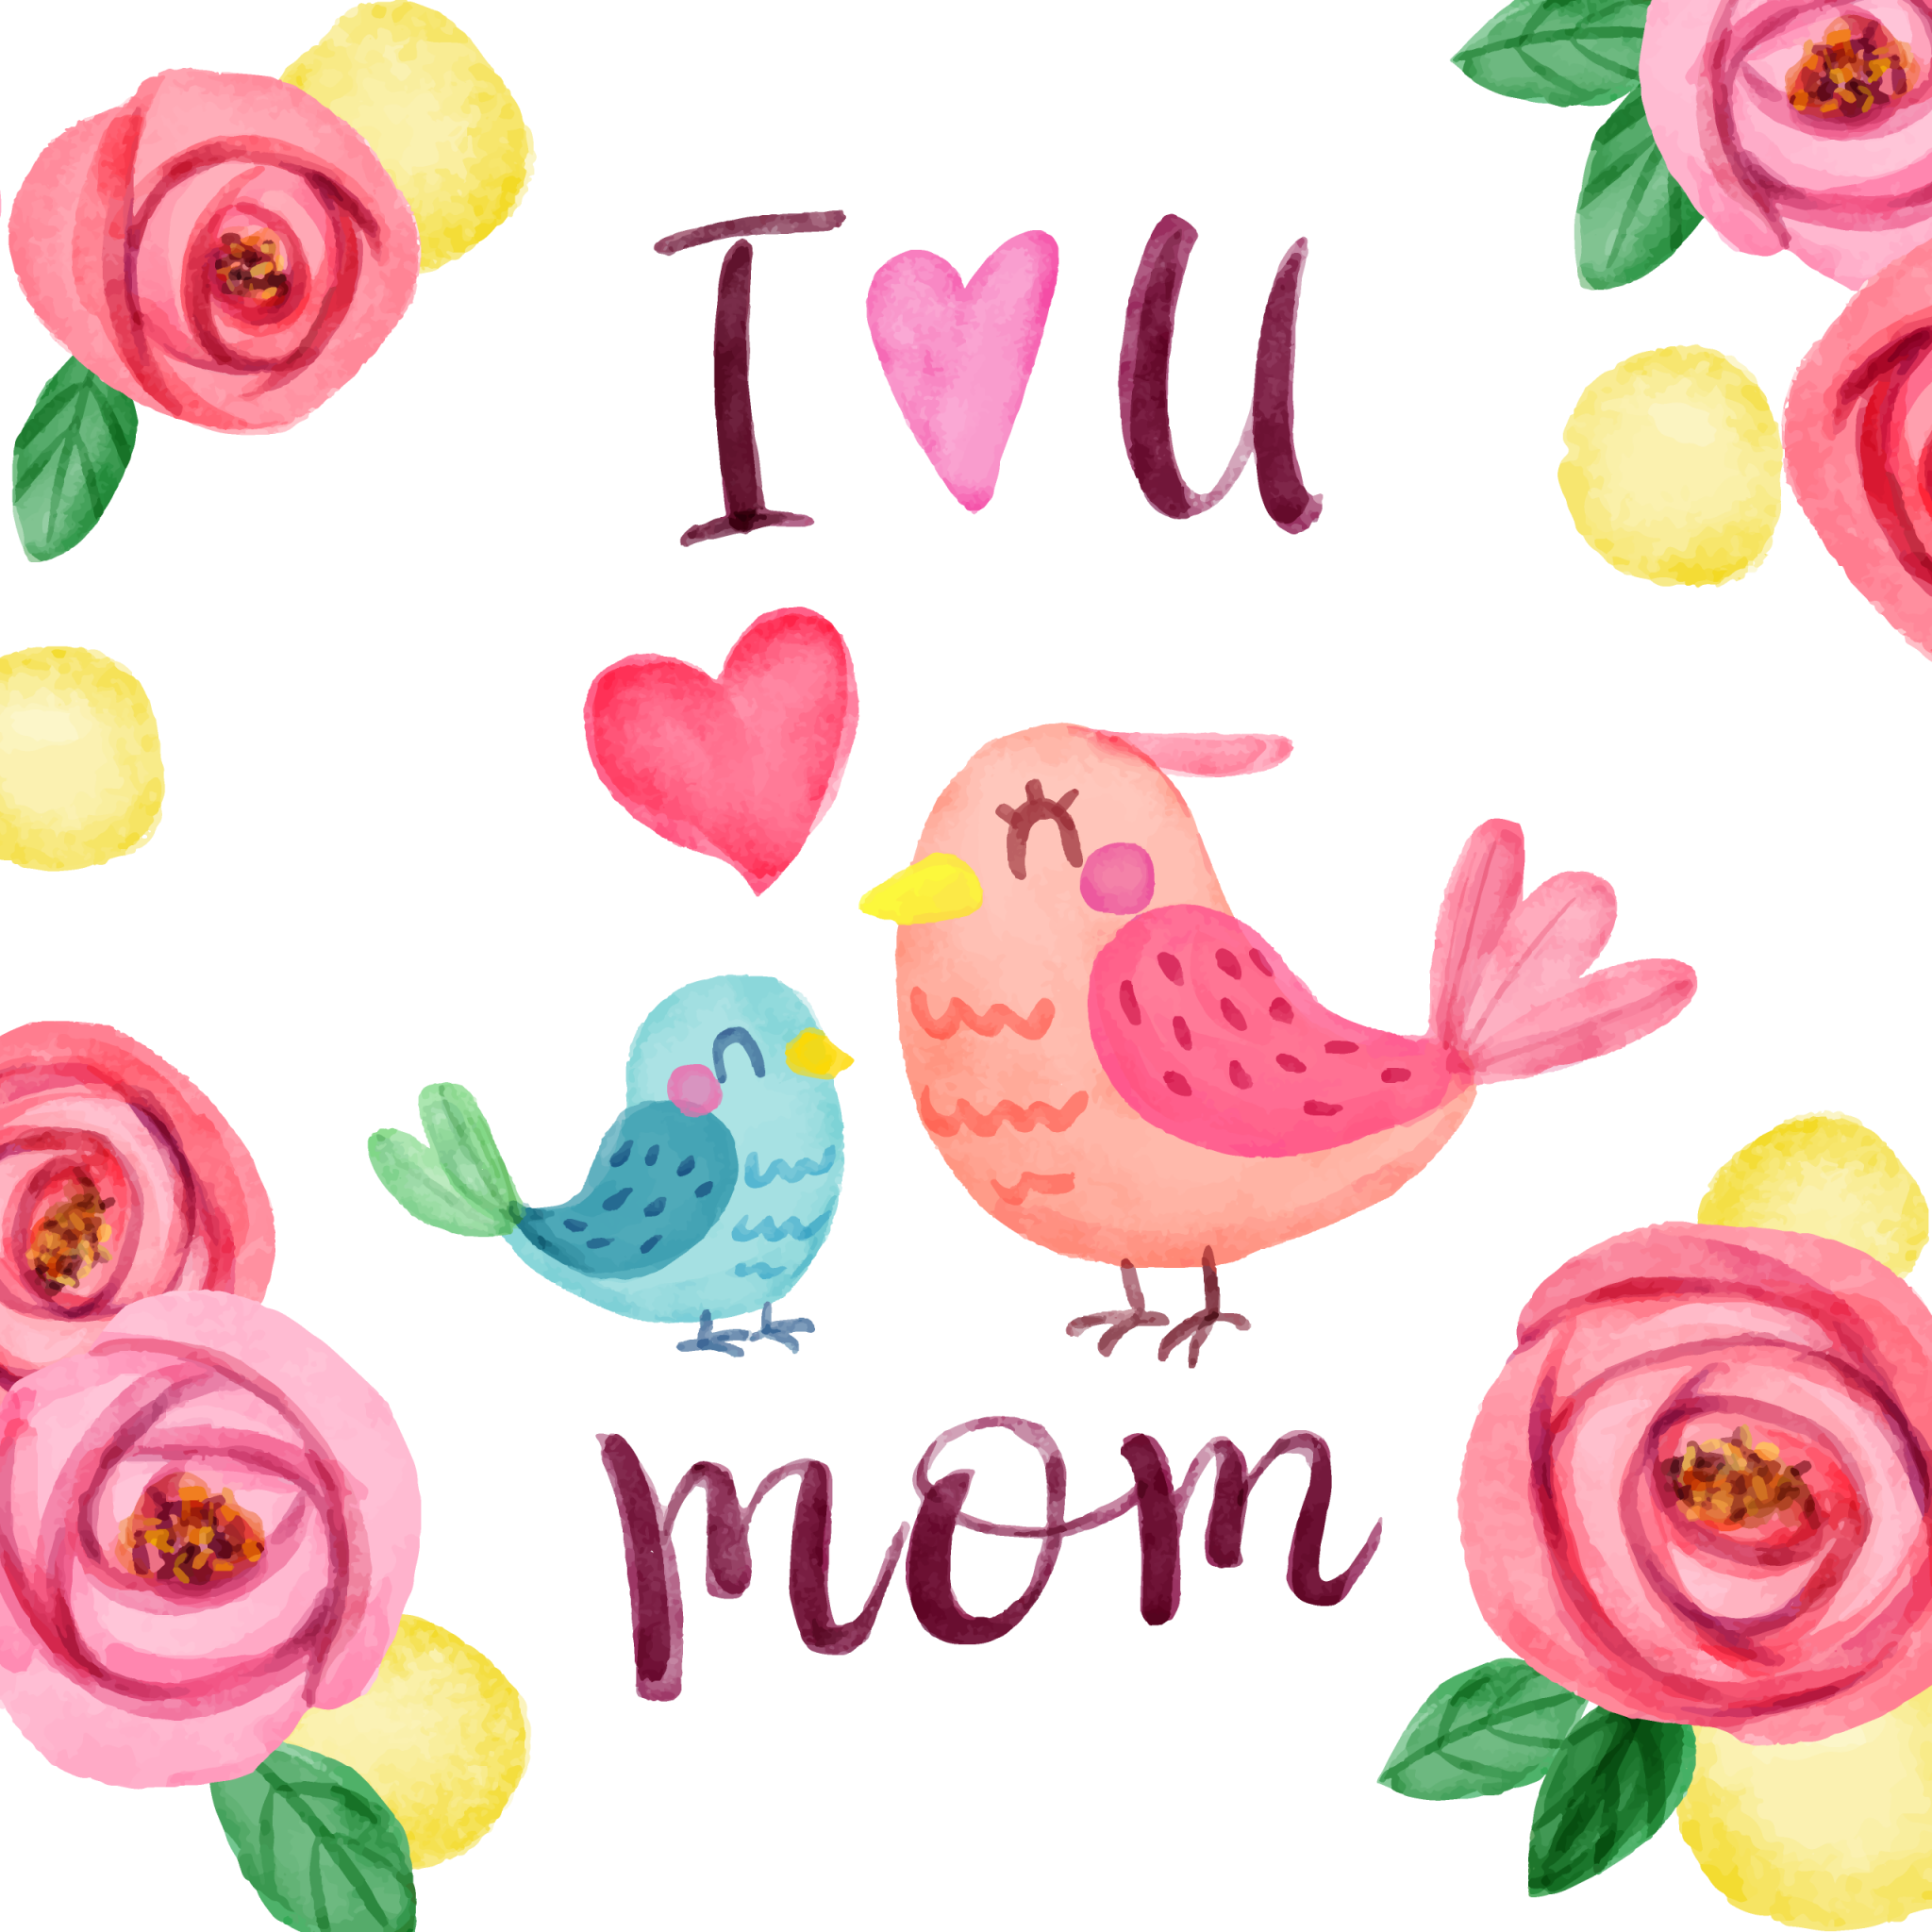 I Love You Mom Wallpaper 4K, Happy Mother\'s Day, #1547